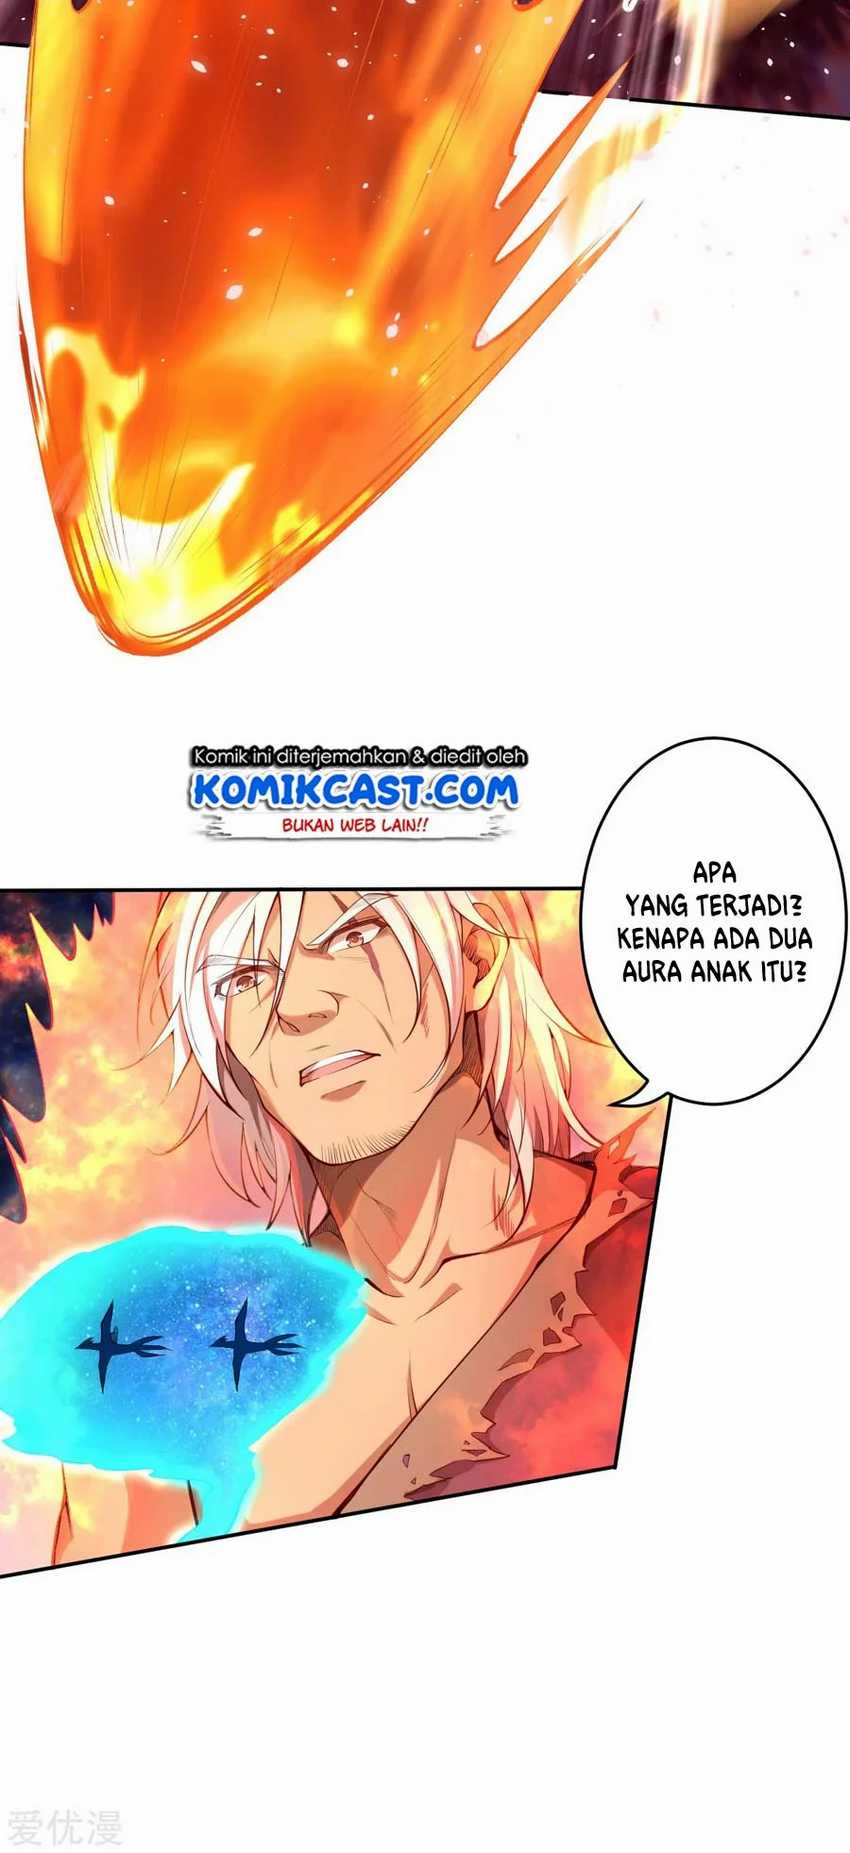 Against the Gods Chapter 230